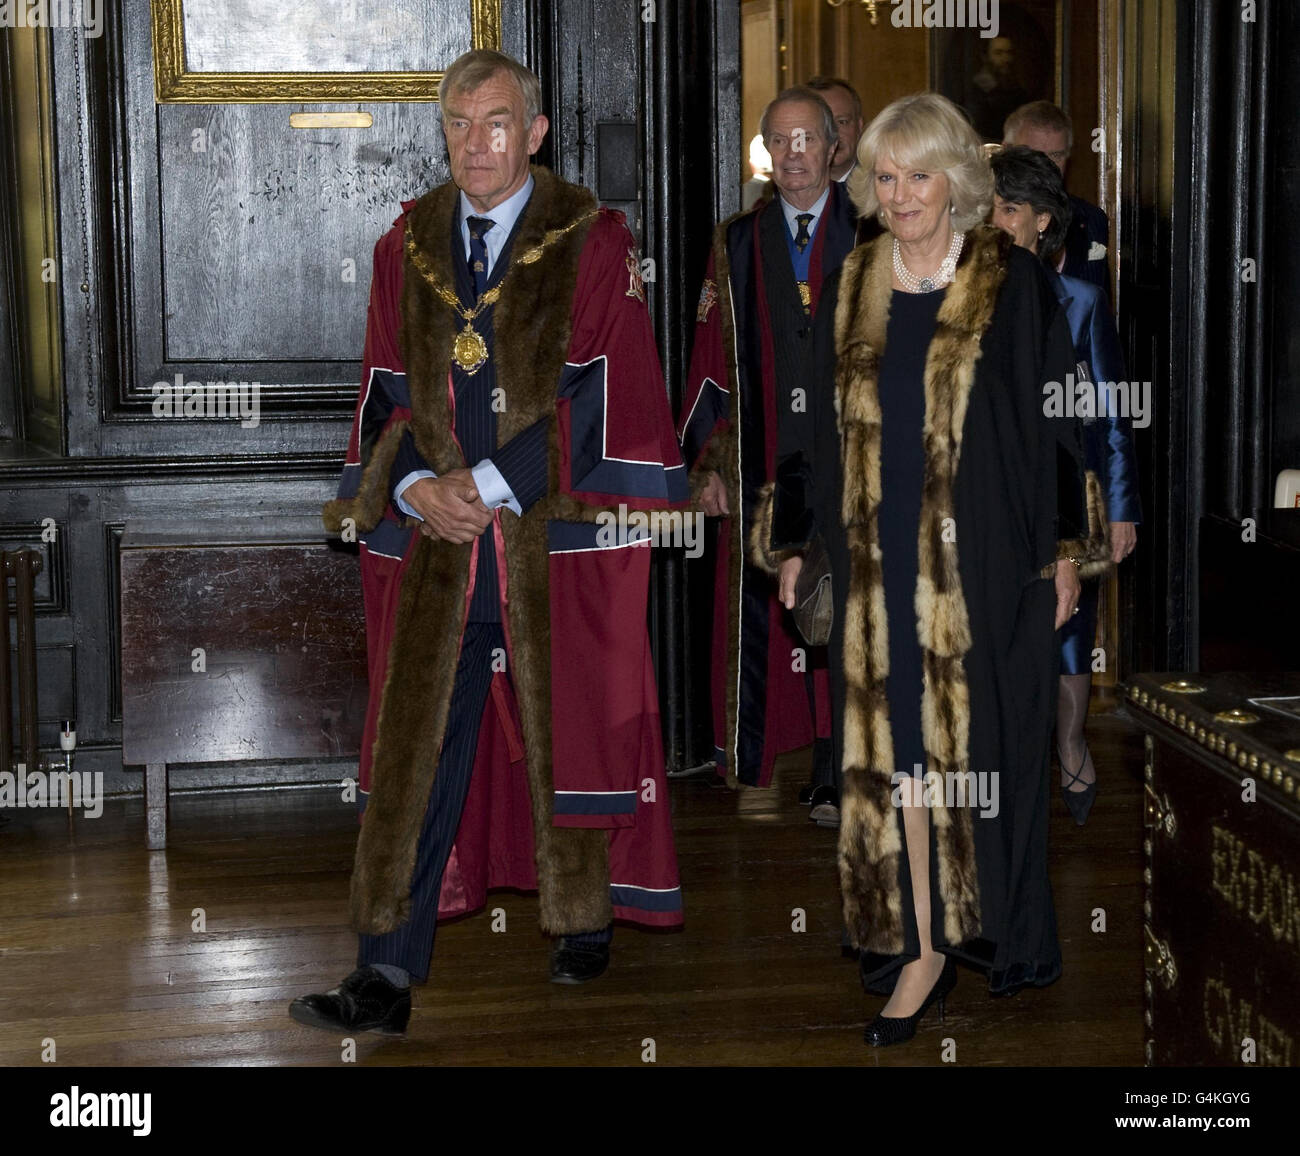 The Duchess of Cornwalll in her ceremonial robe after taking an oath to become an Honorary Liveryman of the Worshipful Company of Joiners and Ceilers during a lunch at the Apothecaries' Hall, London. Stock Photo